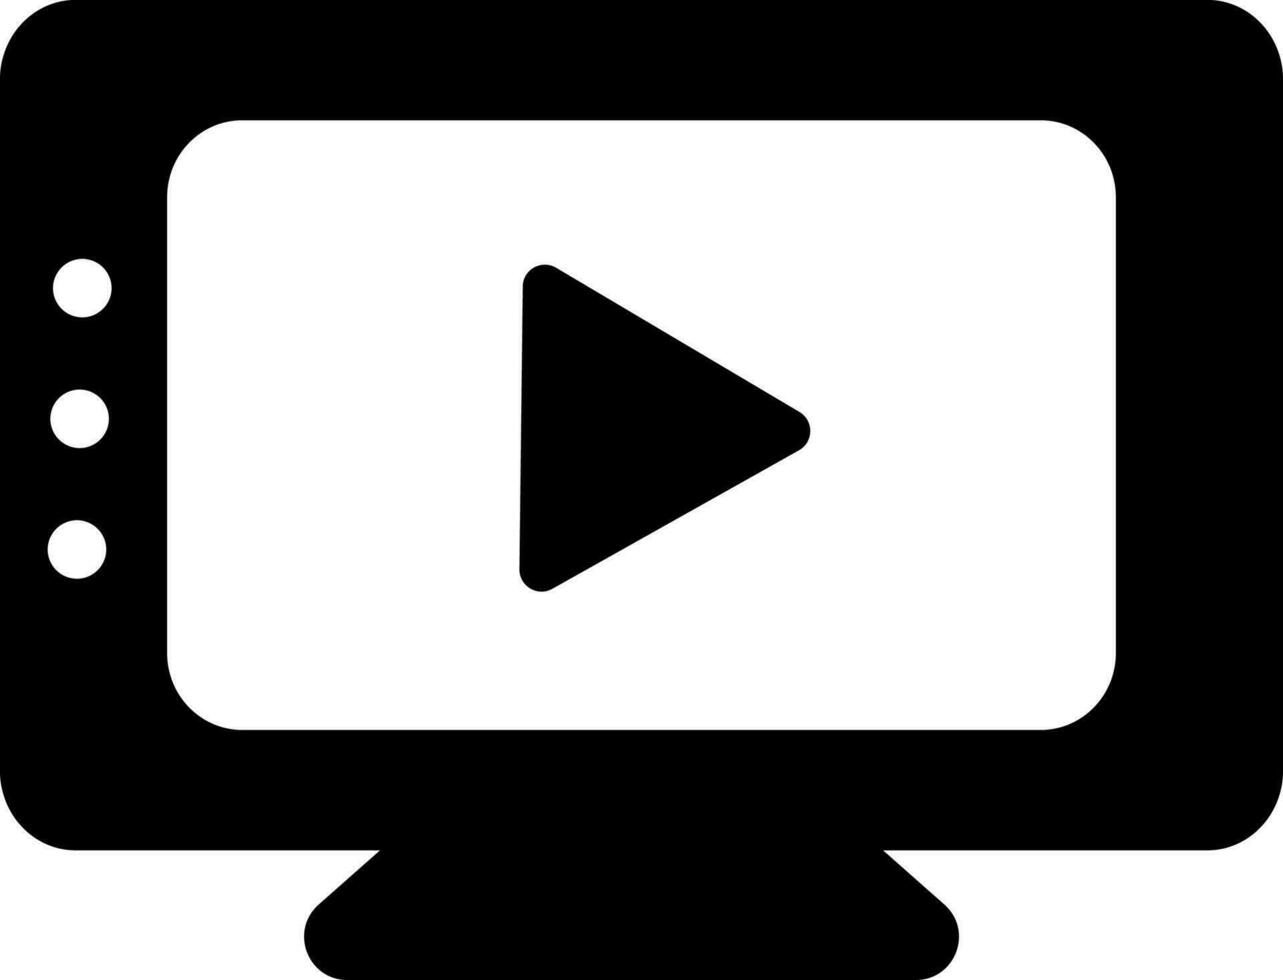 Video player Black and White icon in flat style. vector